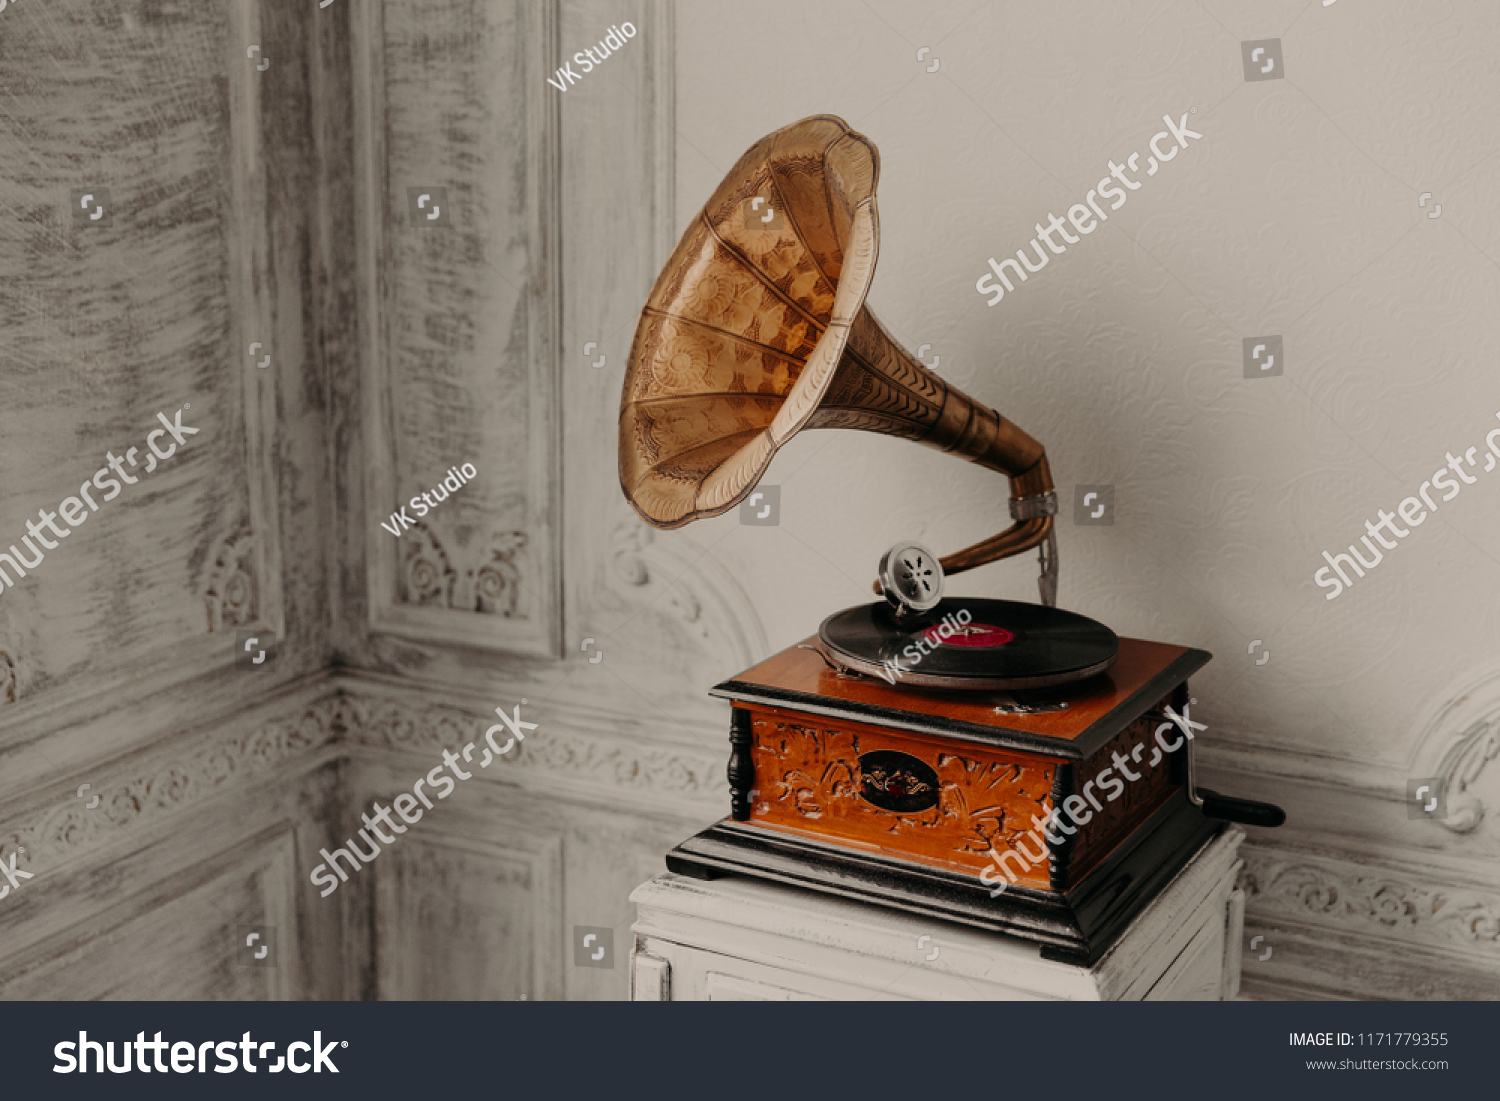 Music device. Old gramophone with plate or vinyl disk on wooden box. Antique brass record player. Gramophone with horn speaker. Retro entertainment concept. #1171779355